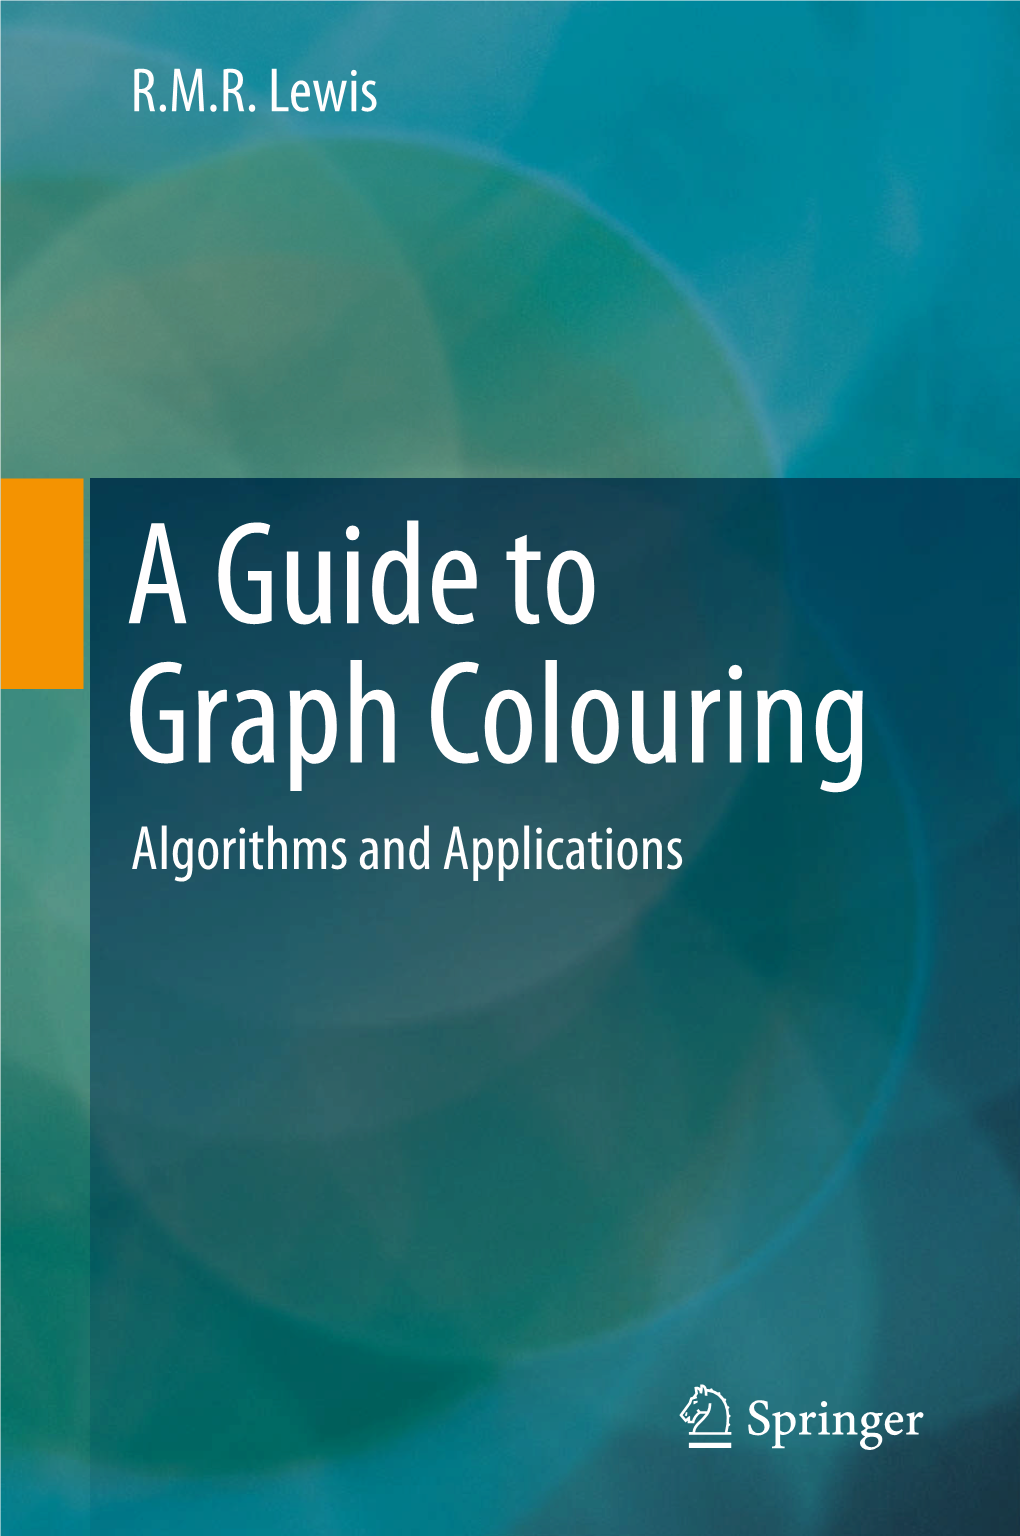 A Guide to Graph Colouring Algorithms and Applications a Guide to Graph Colouring R.M.R